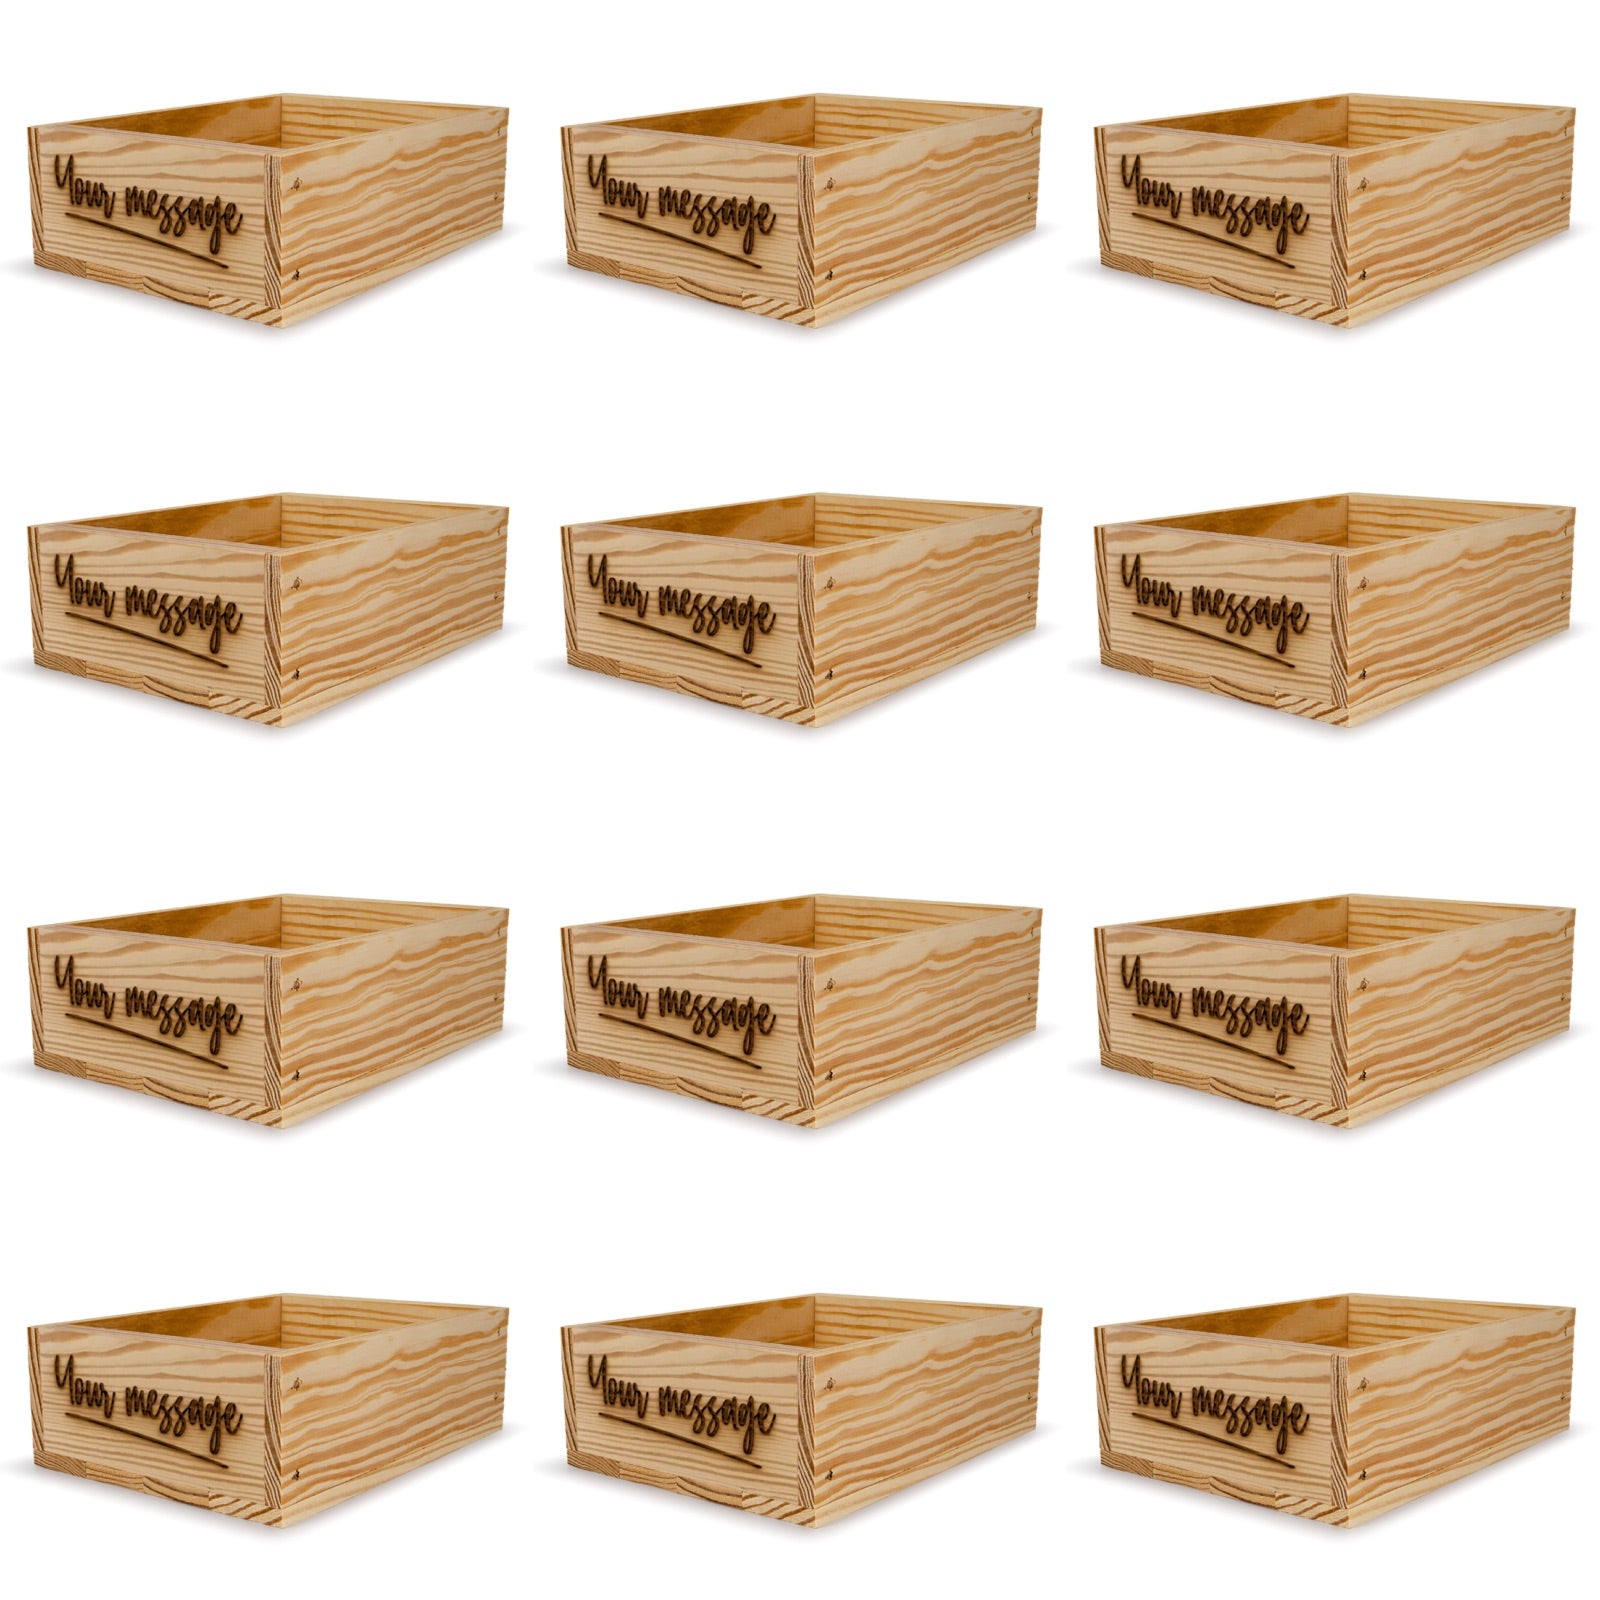 12 Small wooden crates with custom message 8x6.25x2.75